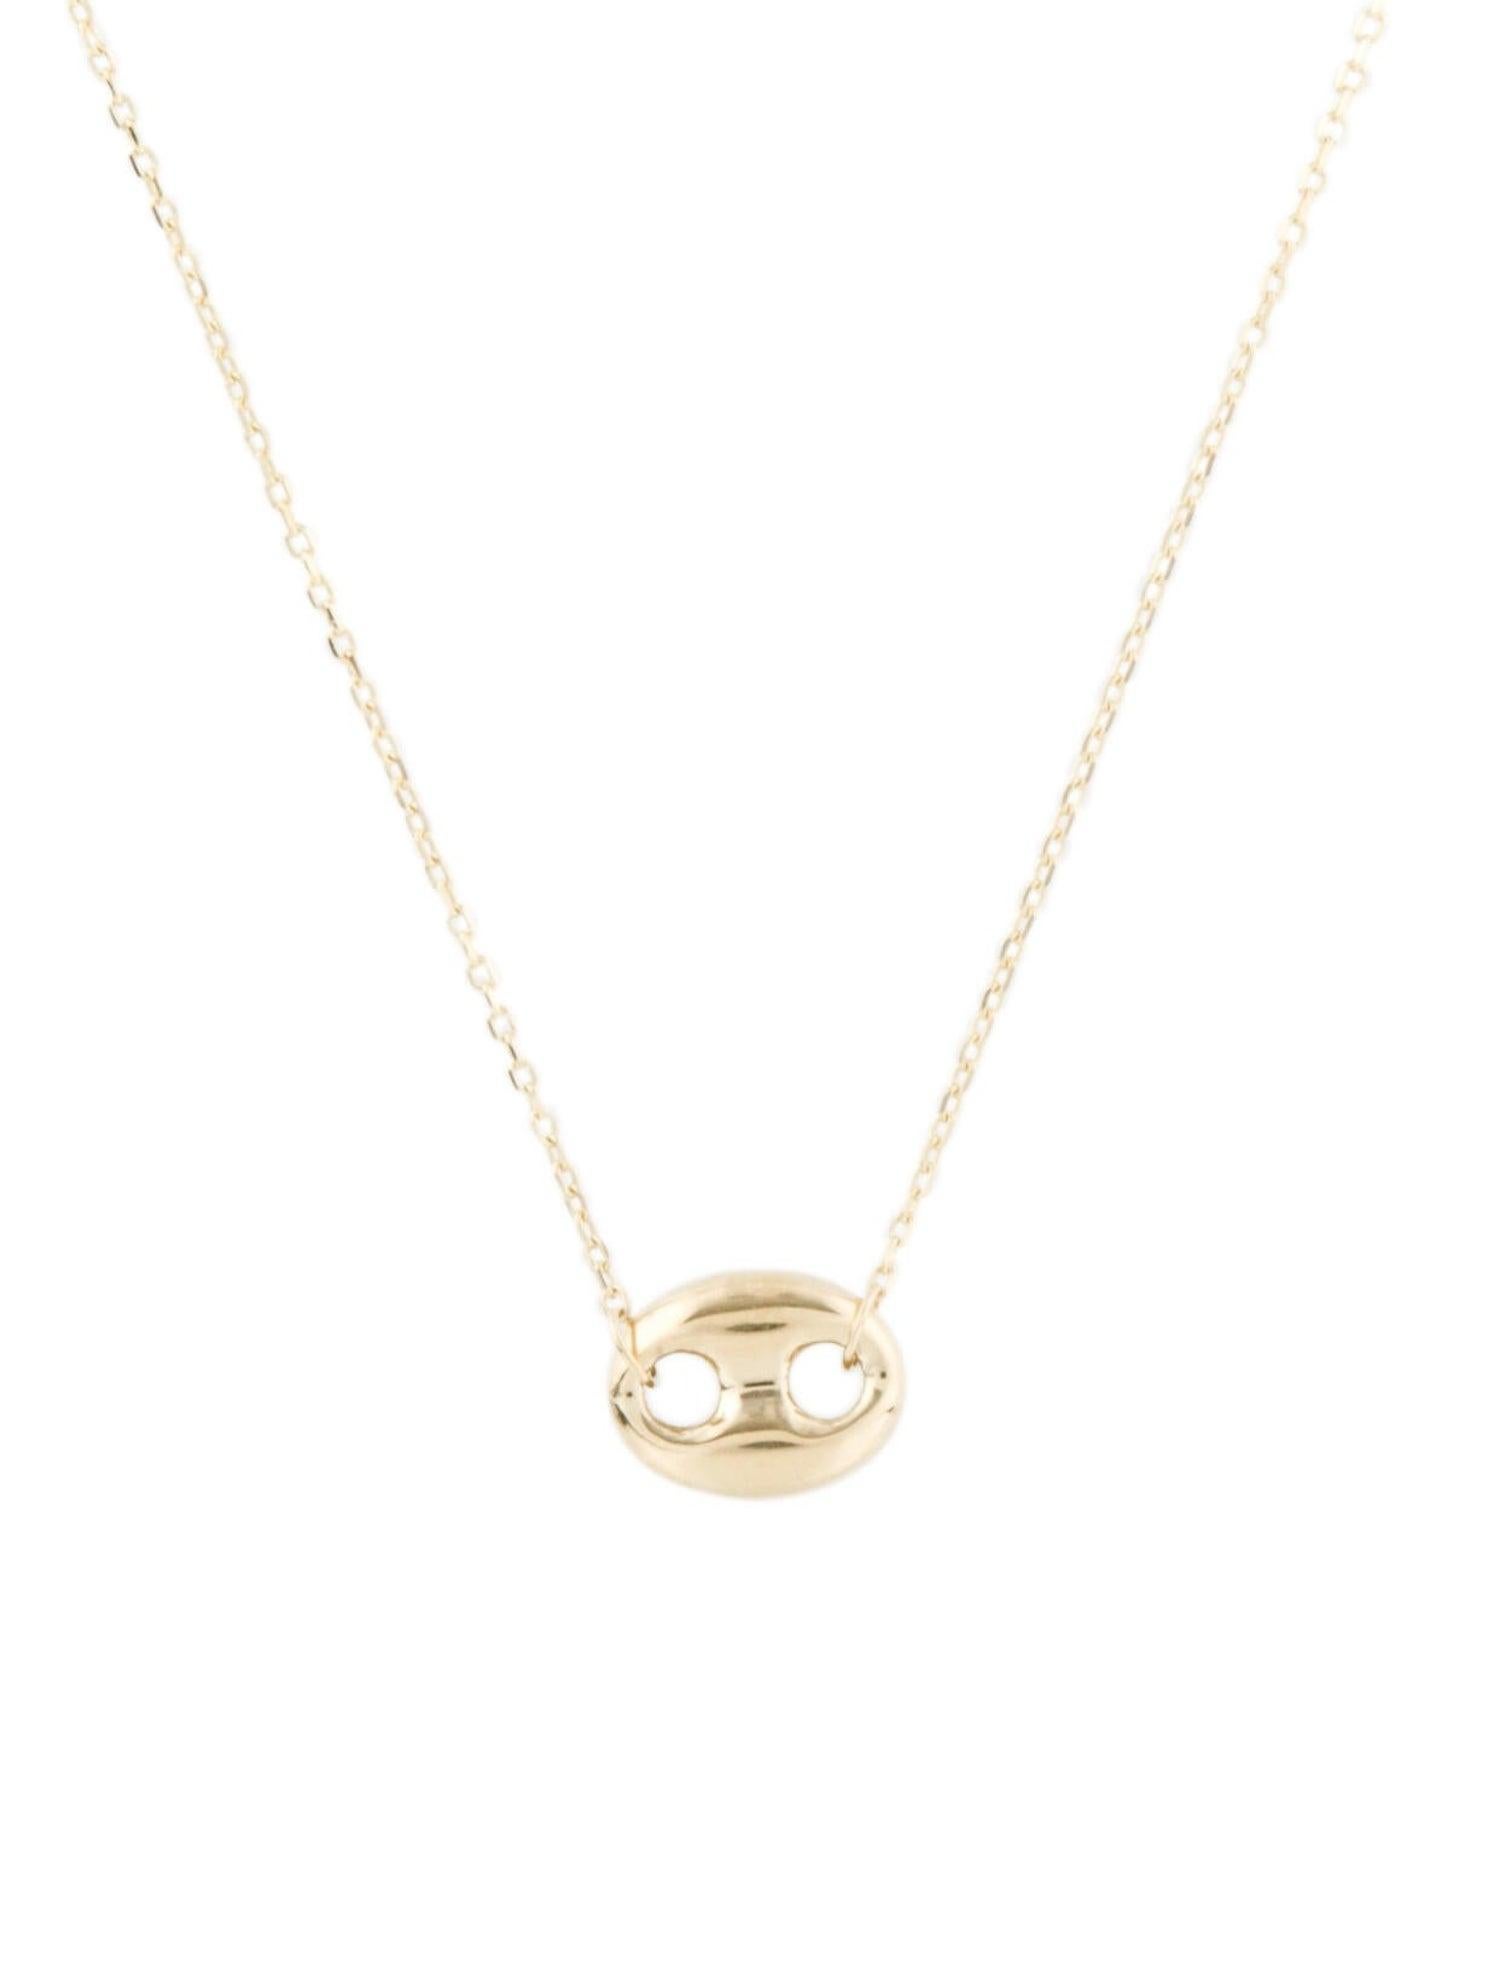 Contemporary 14k Yellow Gold Puff Mariner Link Necklace, Gifts for Her, Necklace For Sale